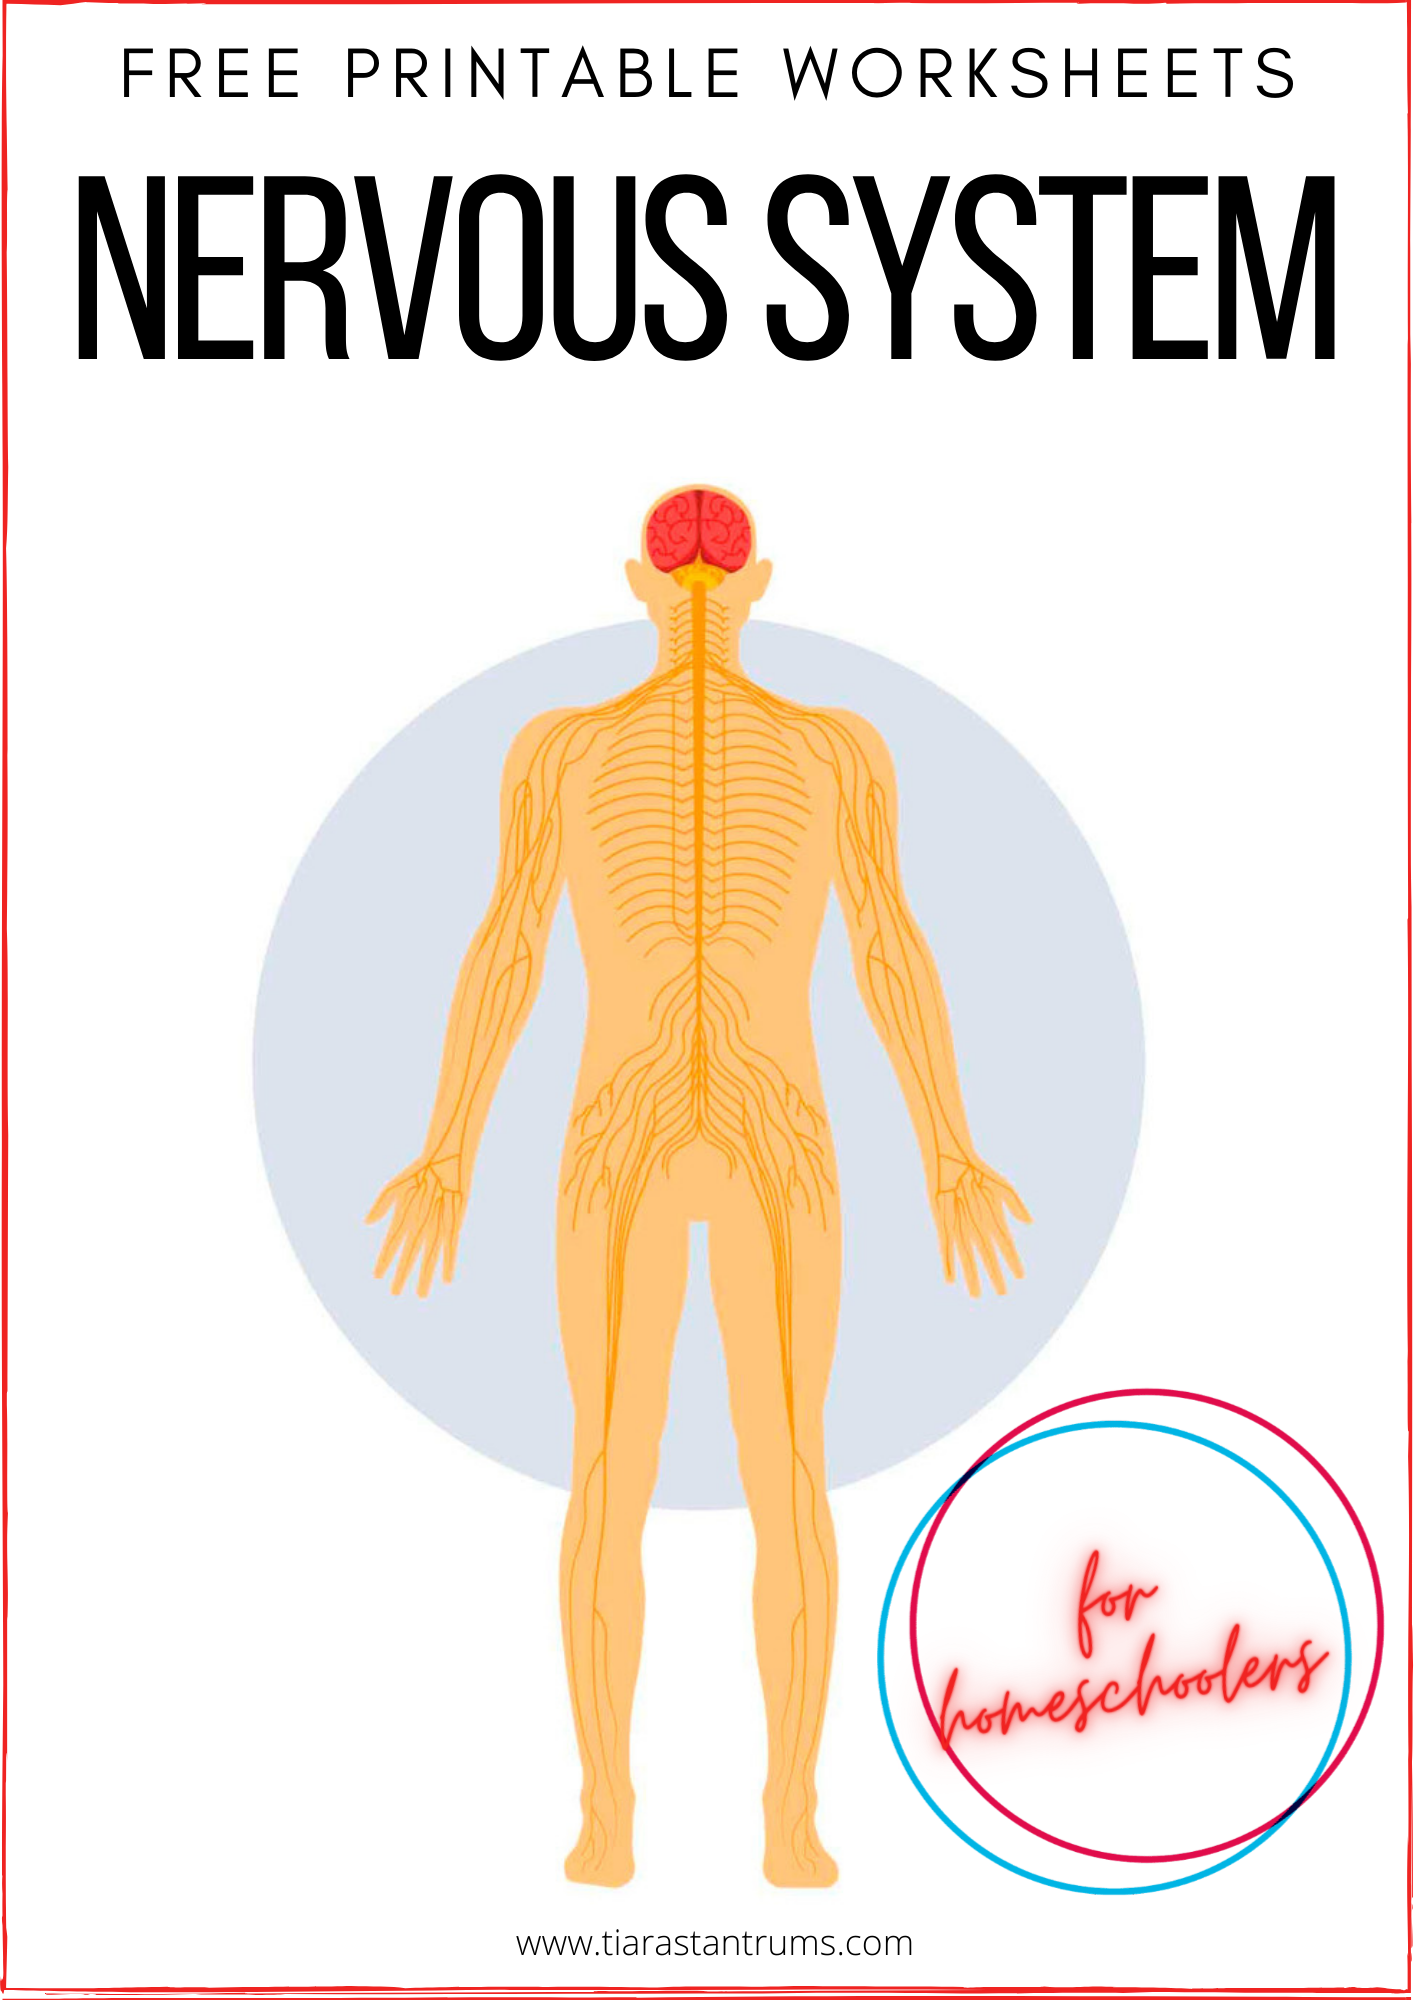 FREE Human Body Systems Labeling Worksheets — Tiaras & Tantrums